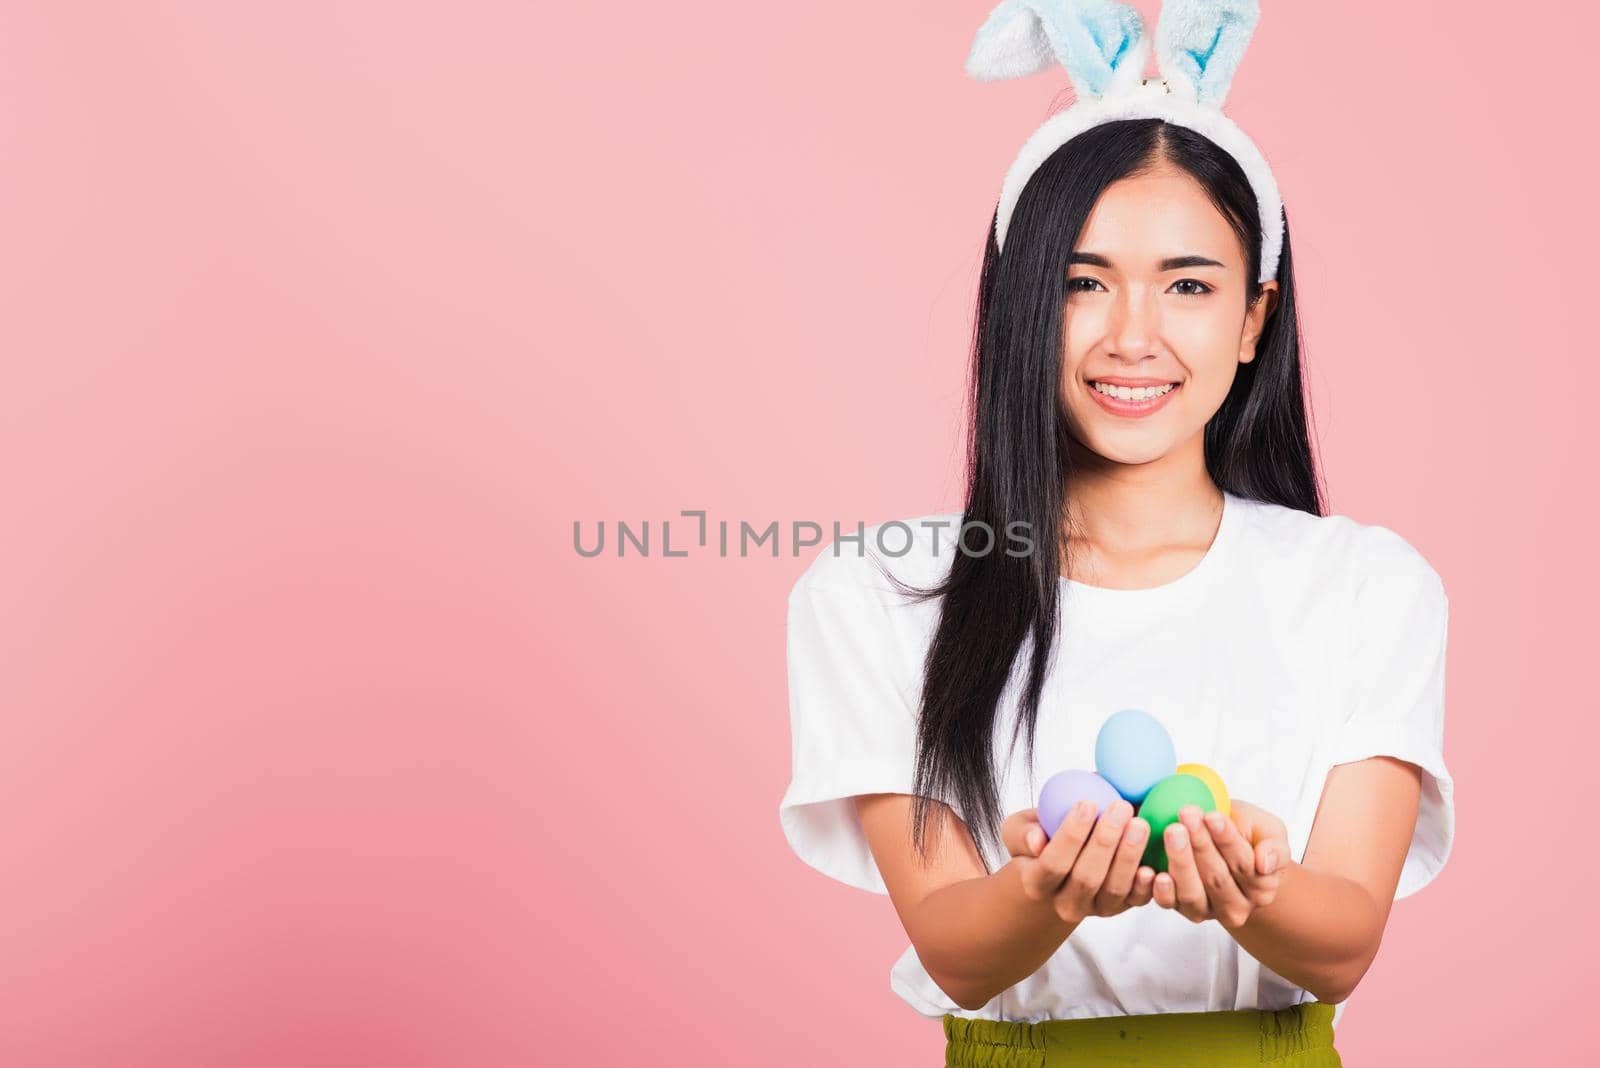 woman smiling wearing rabbit ears holding colorful Easter eggs gift on hands by Sorapop